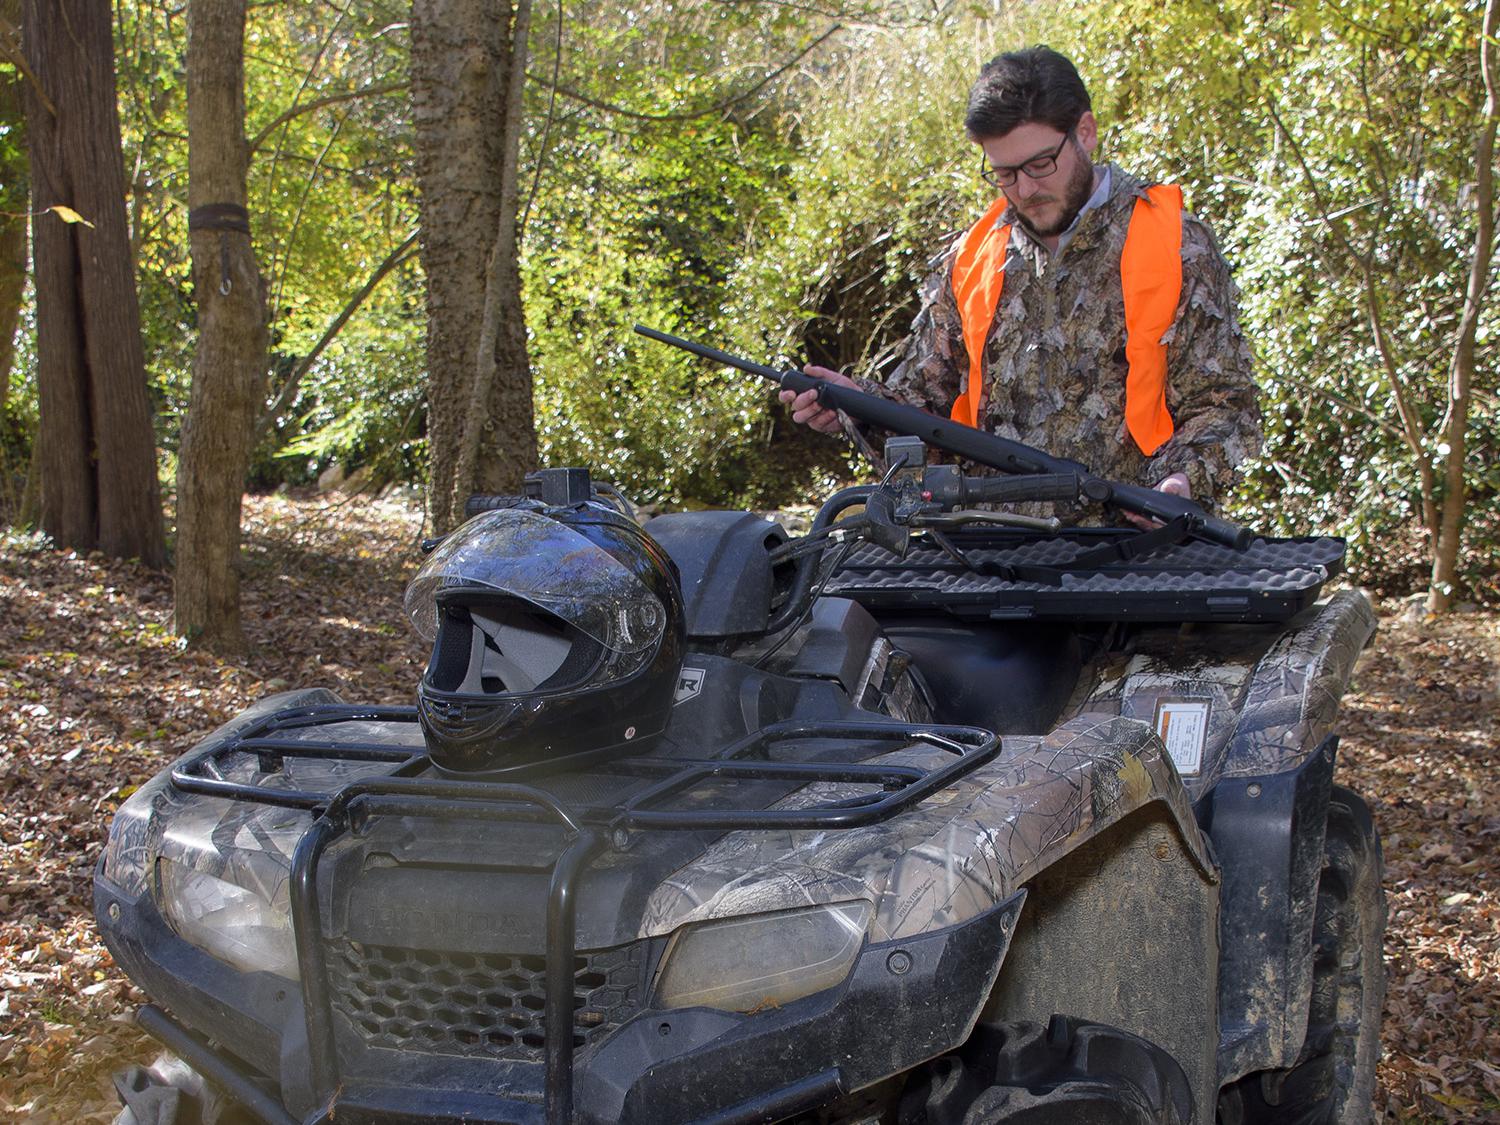 A hunter in camouflage and an orange vest places his rifle into storage on the back of an ATV in the woods.